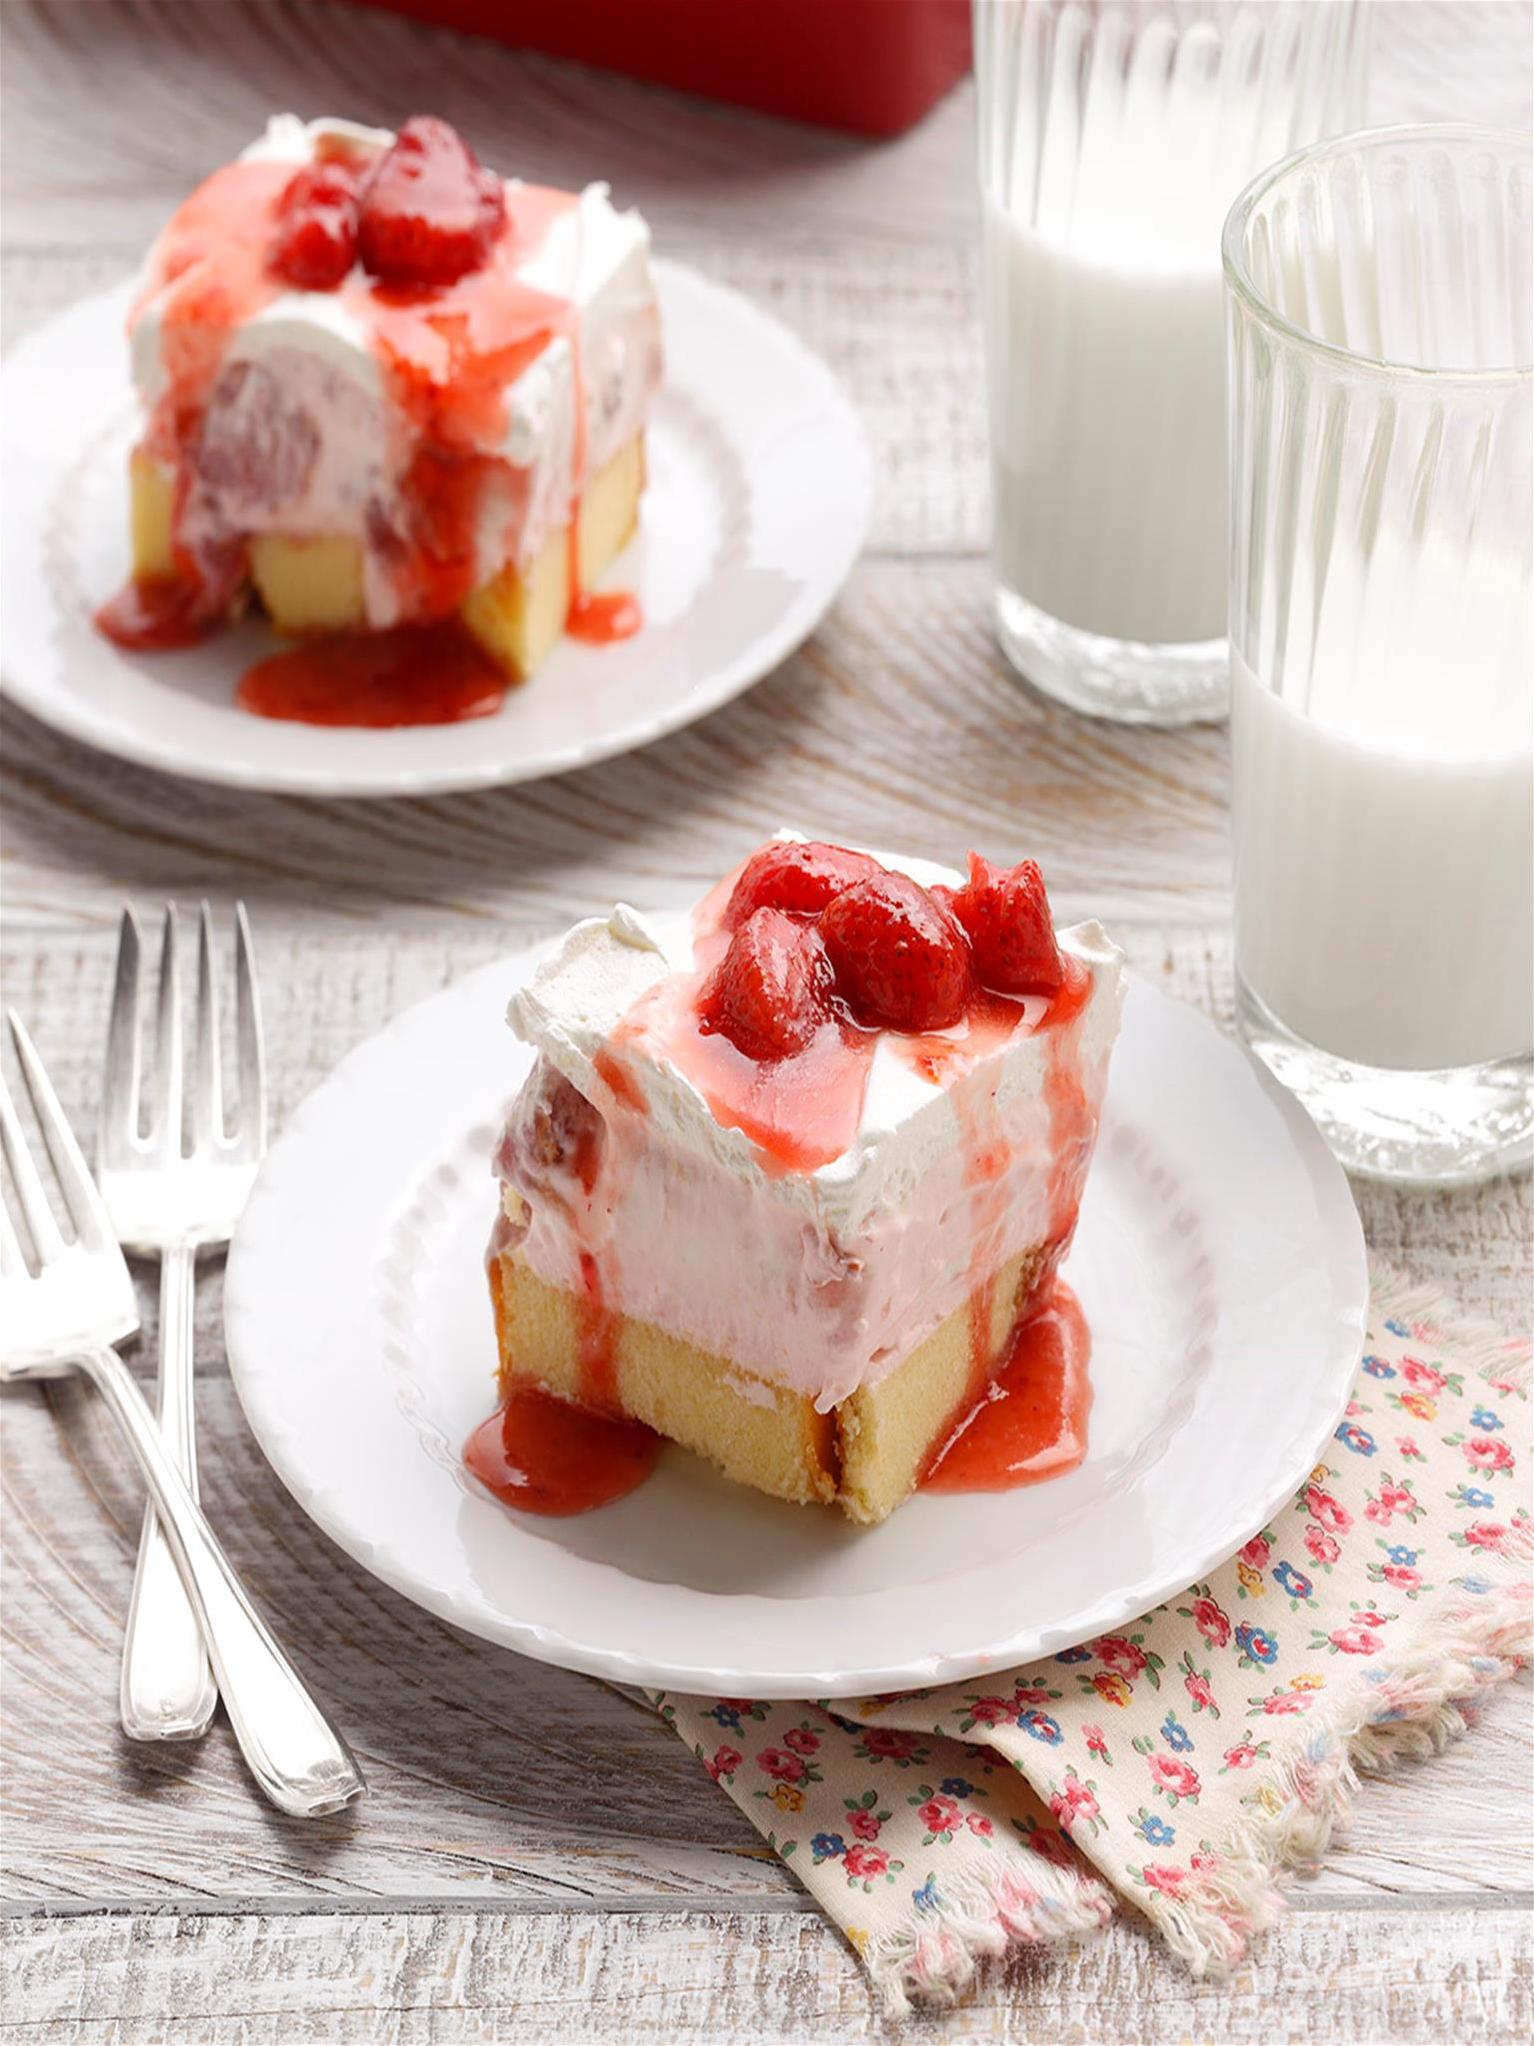  A dessert fit for royalty, Cream Cheese Pound Cake, topped with ripe strawberries and clouds of cream.